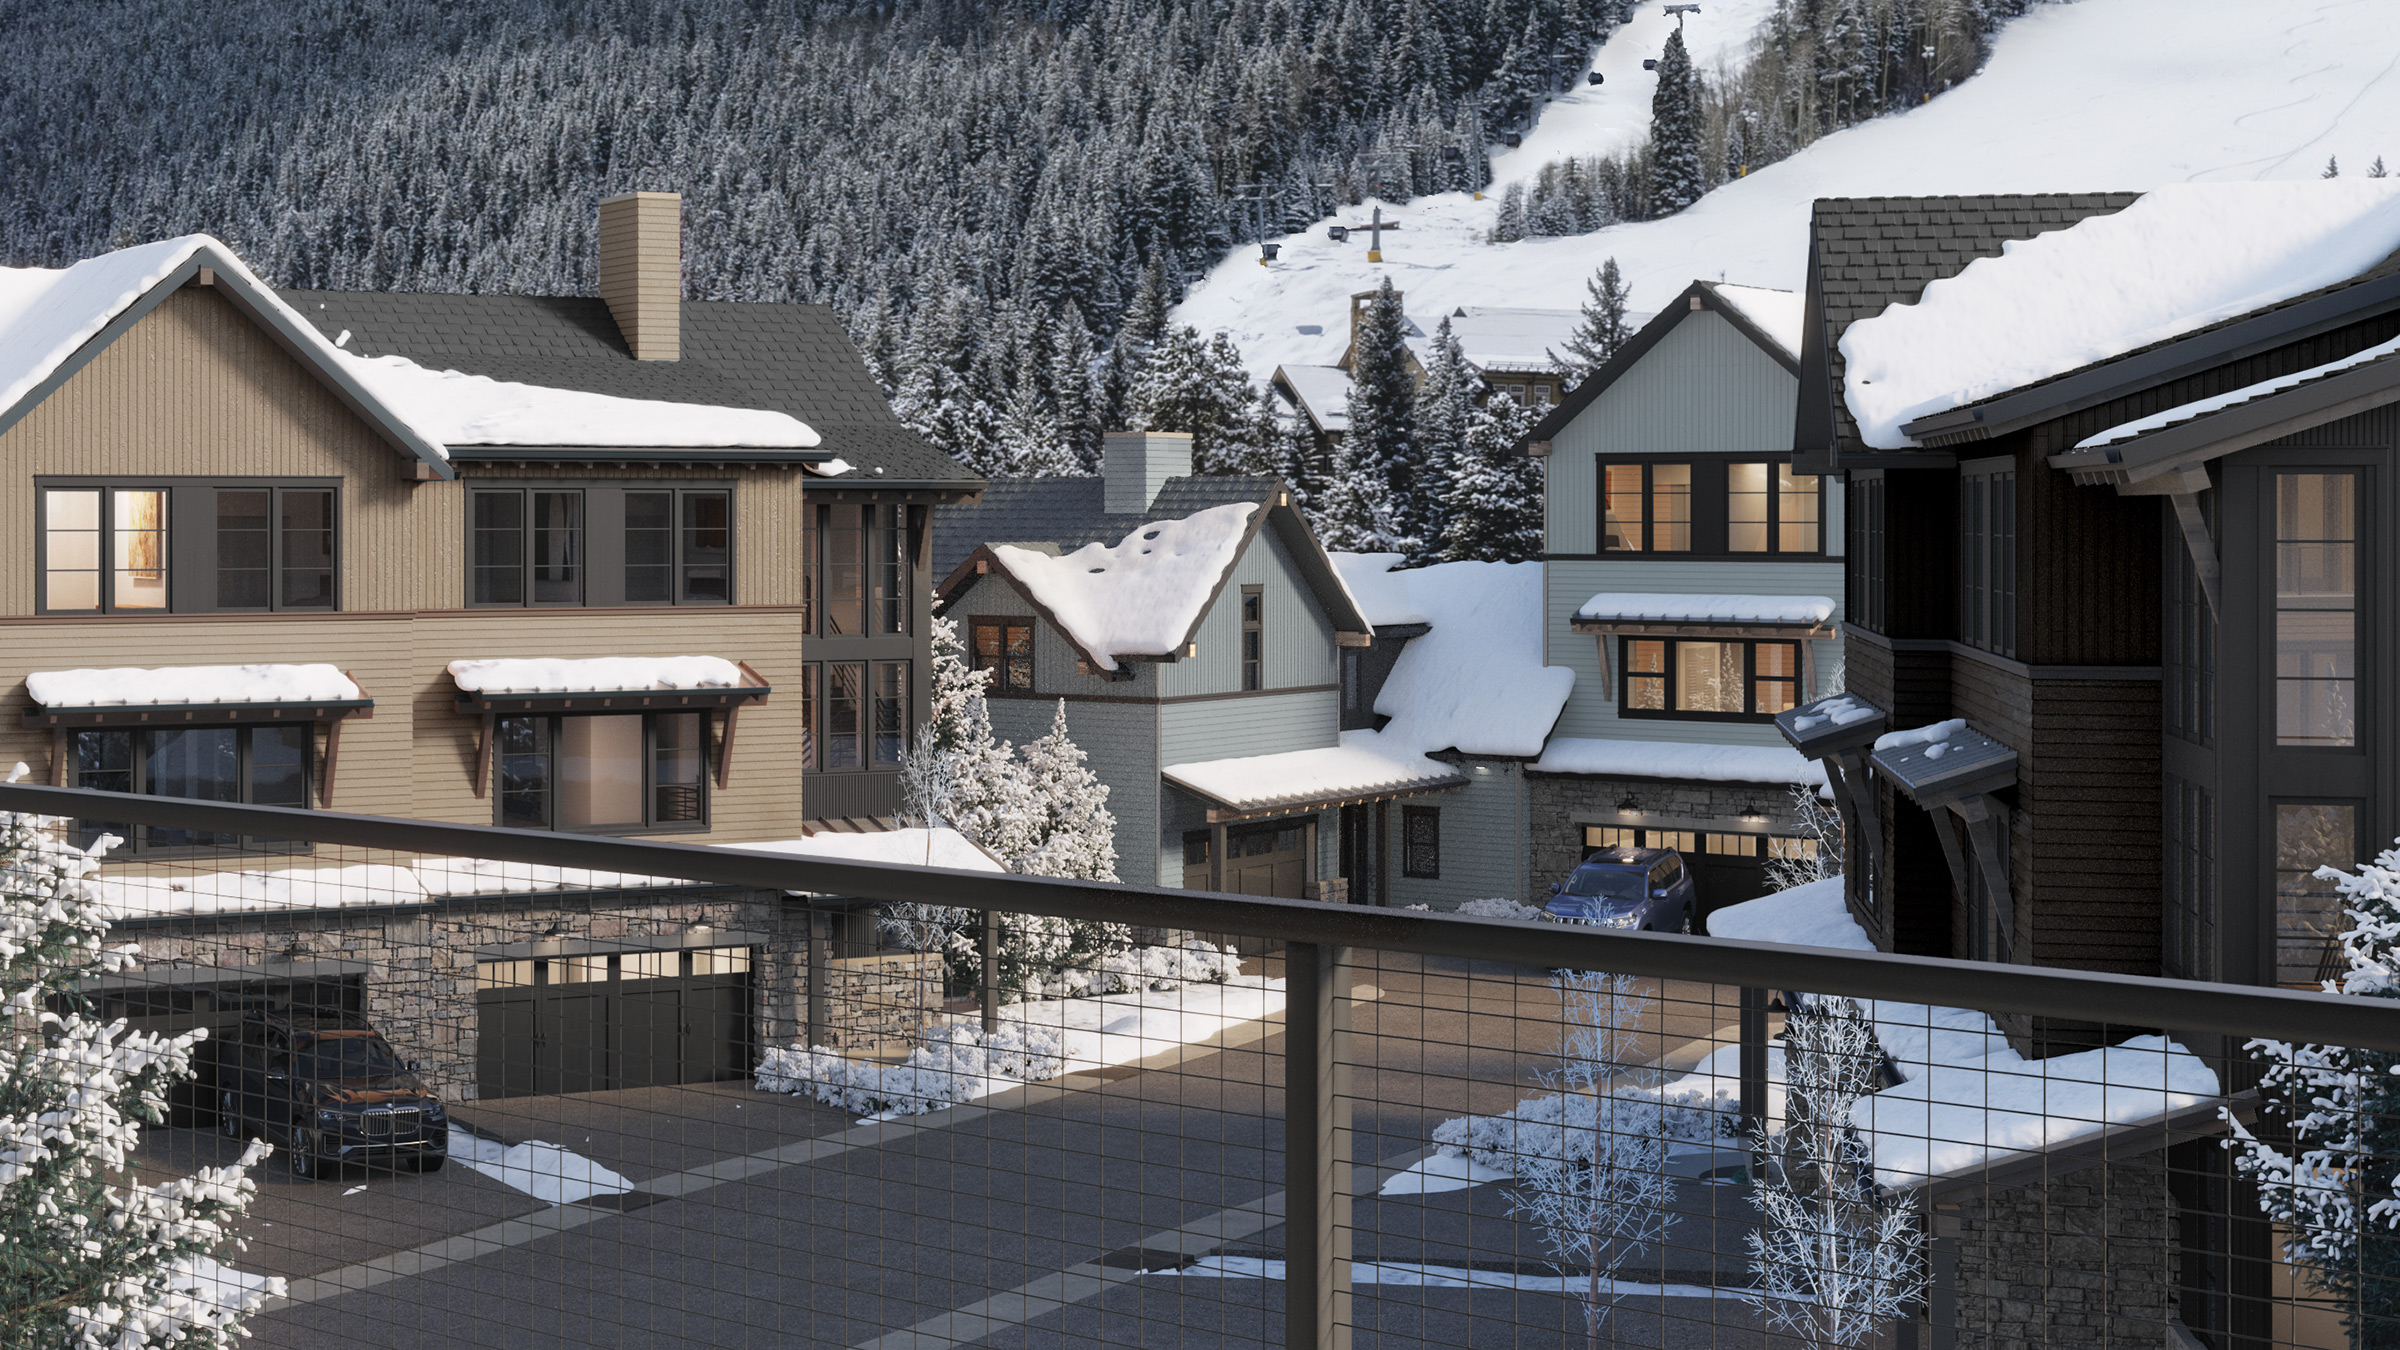 Residences feature mountain modern architecture, two-car garages, and private driveways.